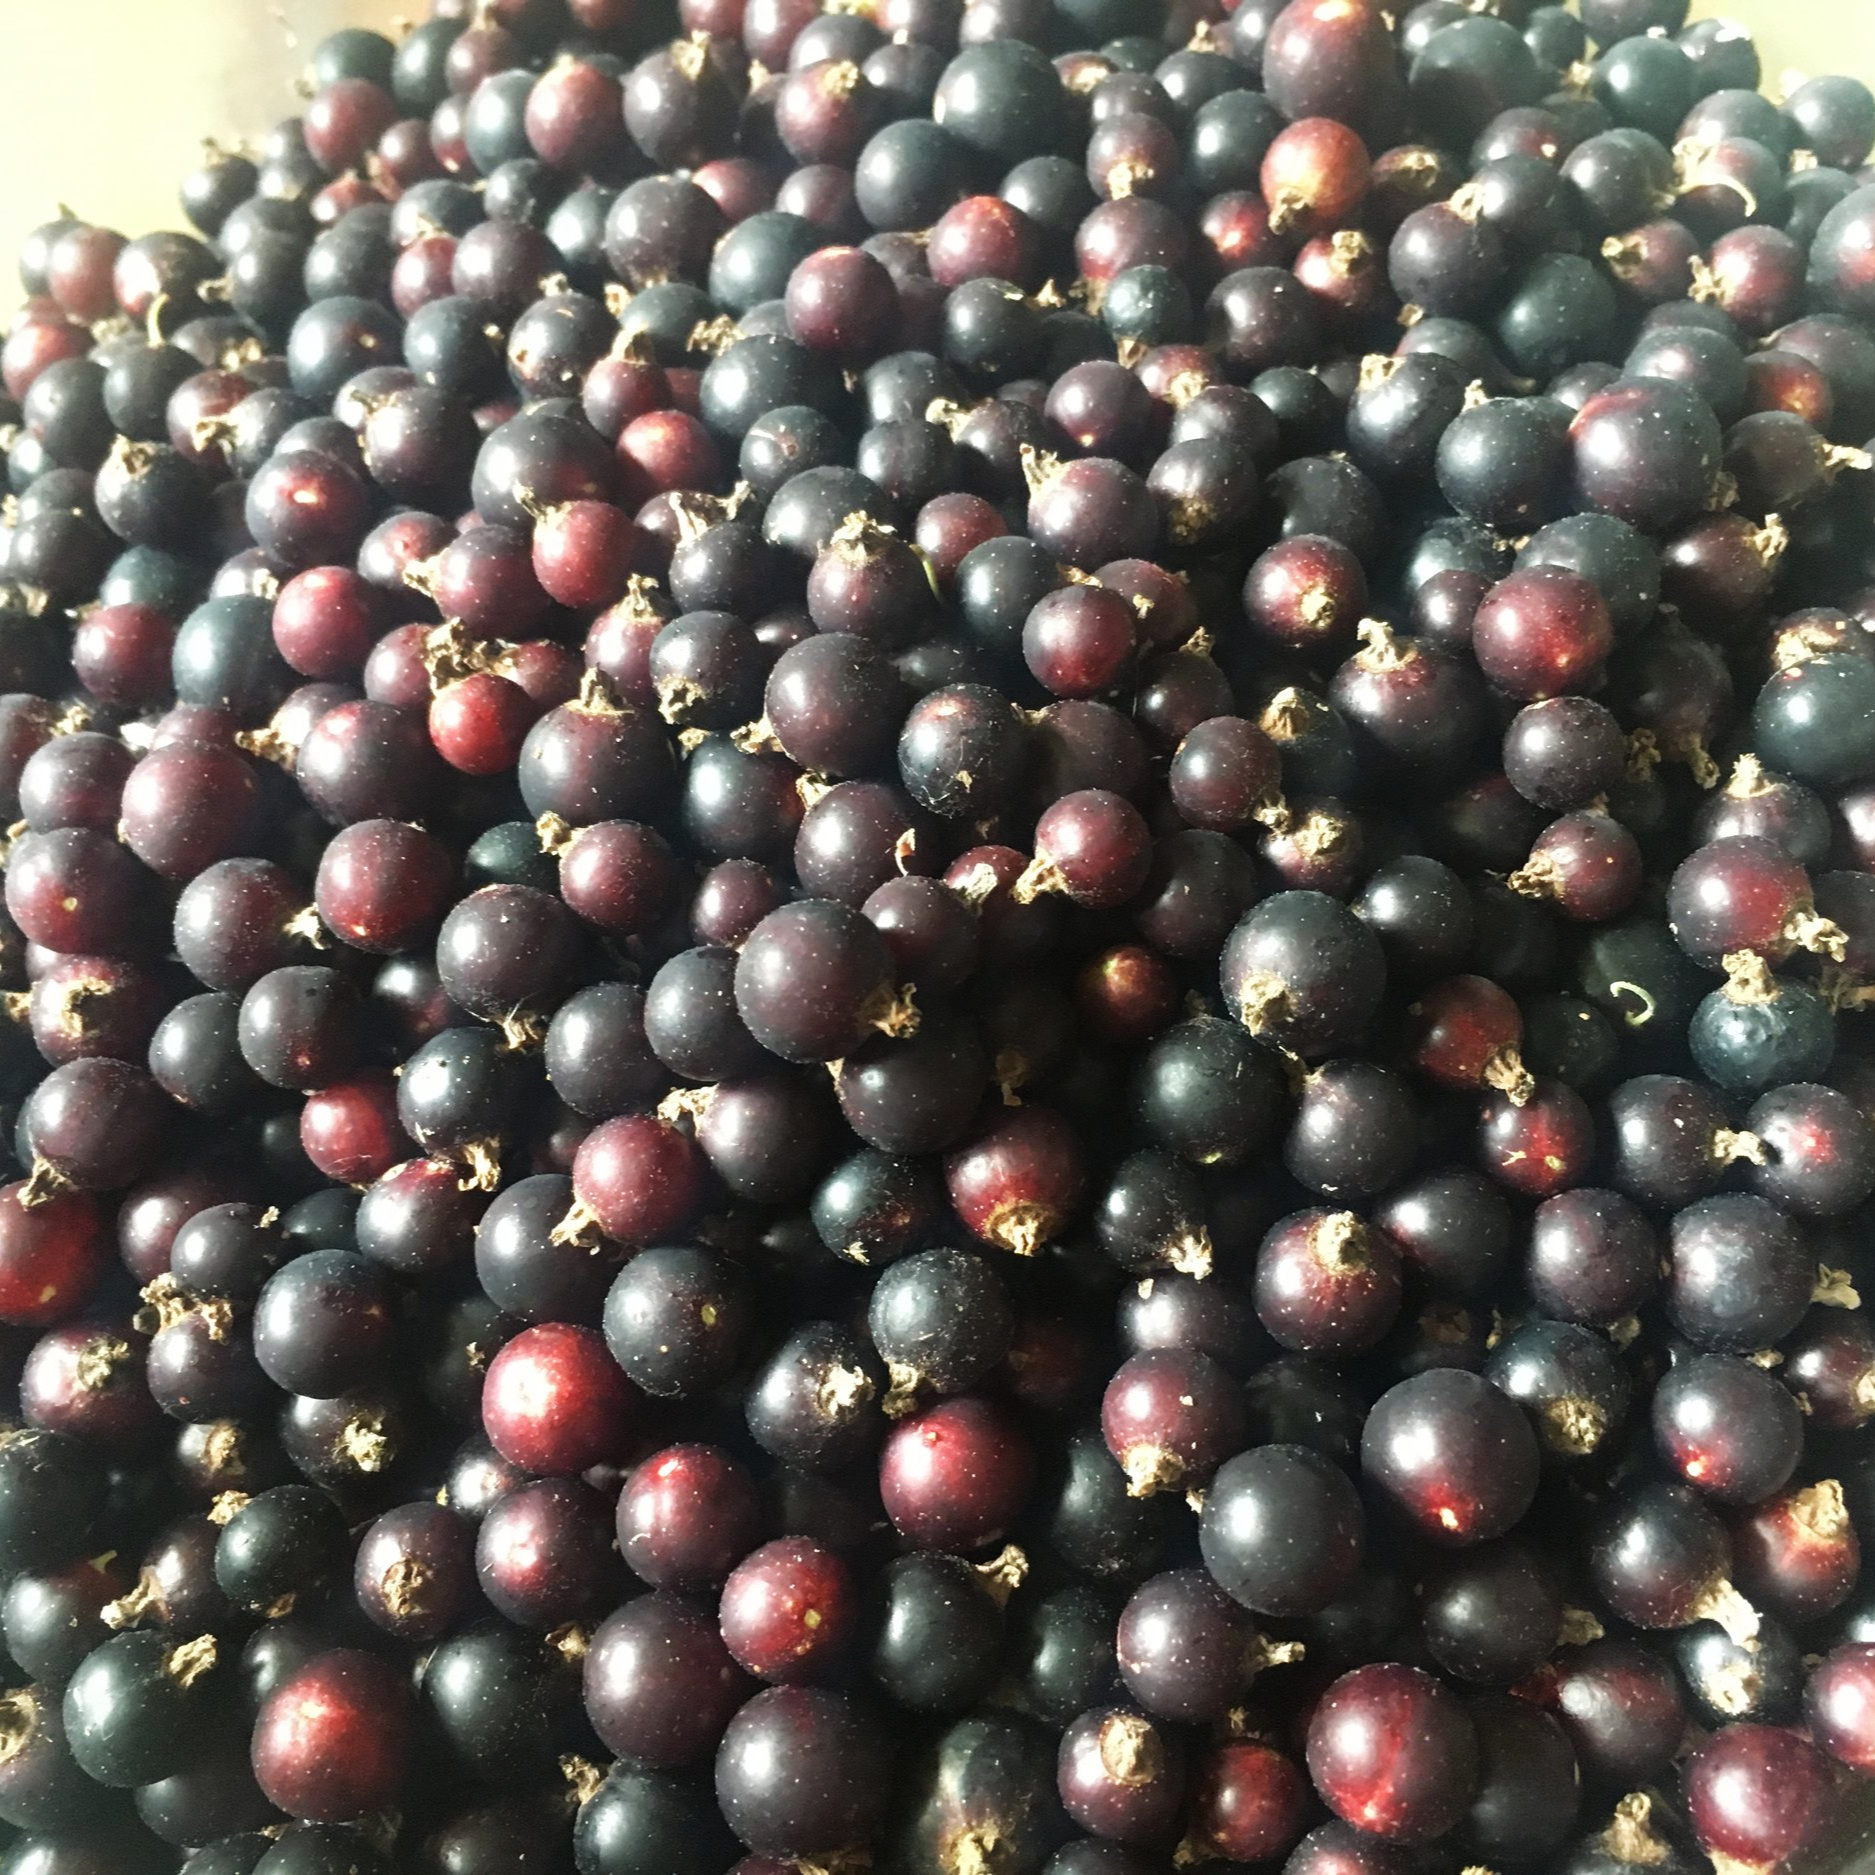 Harvested Black Currants (Copy)